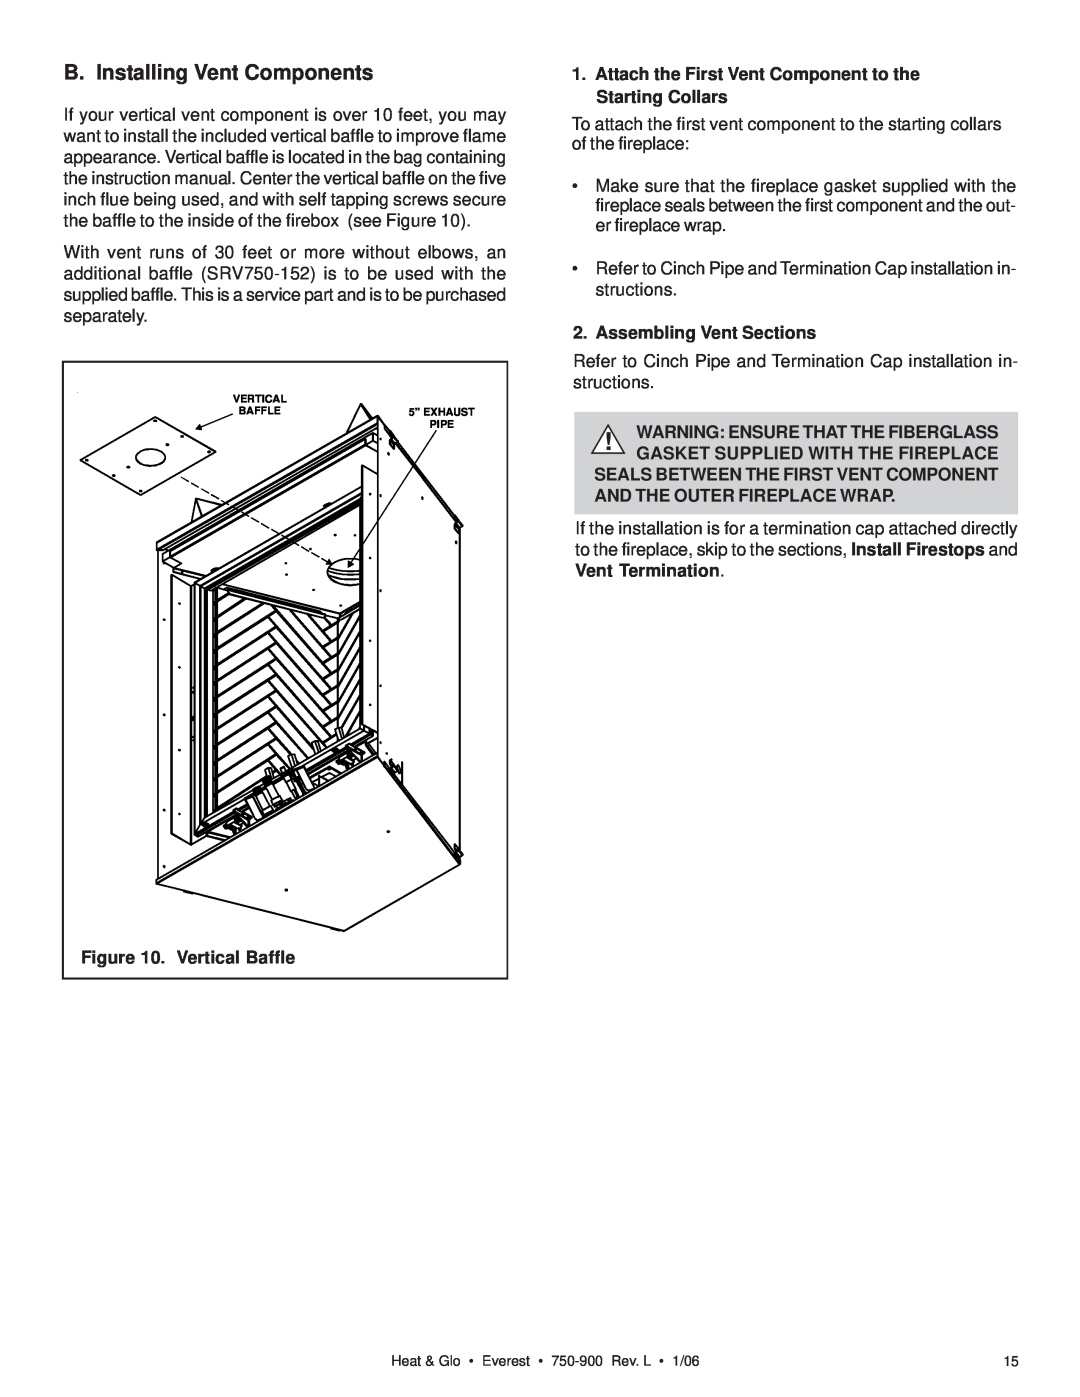 Heat & Glo LifeStyle EVEREST manual B. Installing Vent Components, Vertical Baffle, Assembling Vent Sections 